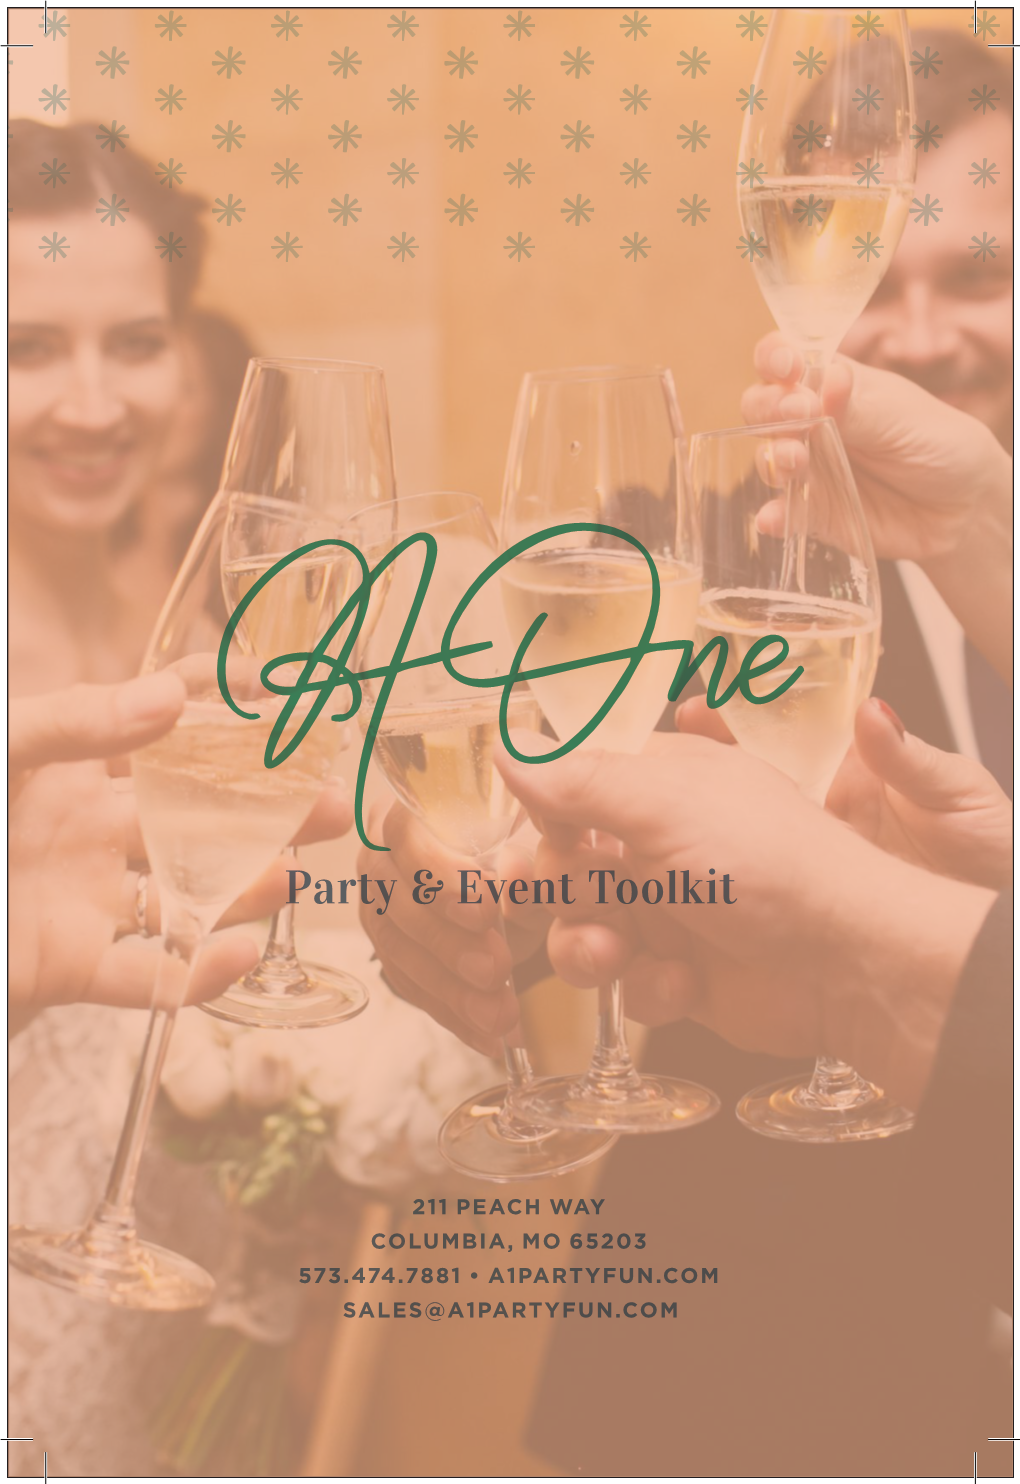 Party & Event Toolkit